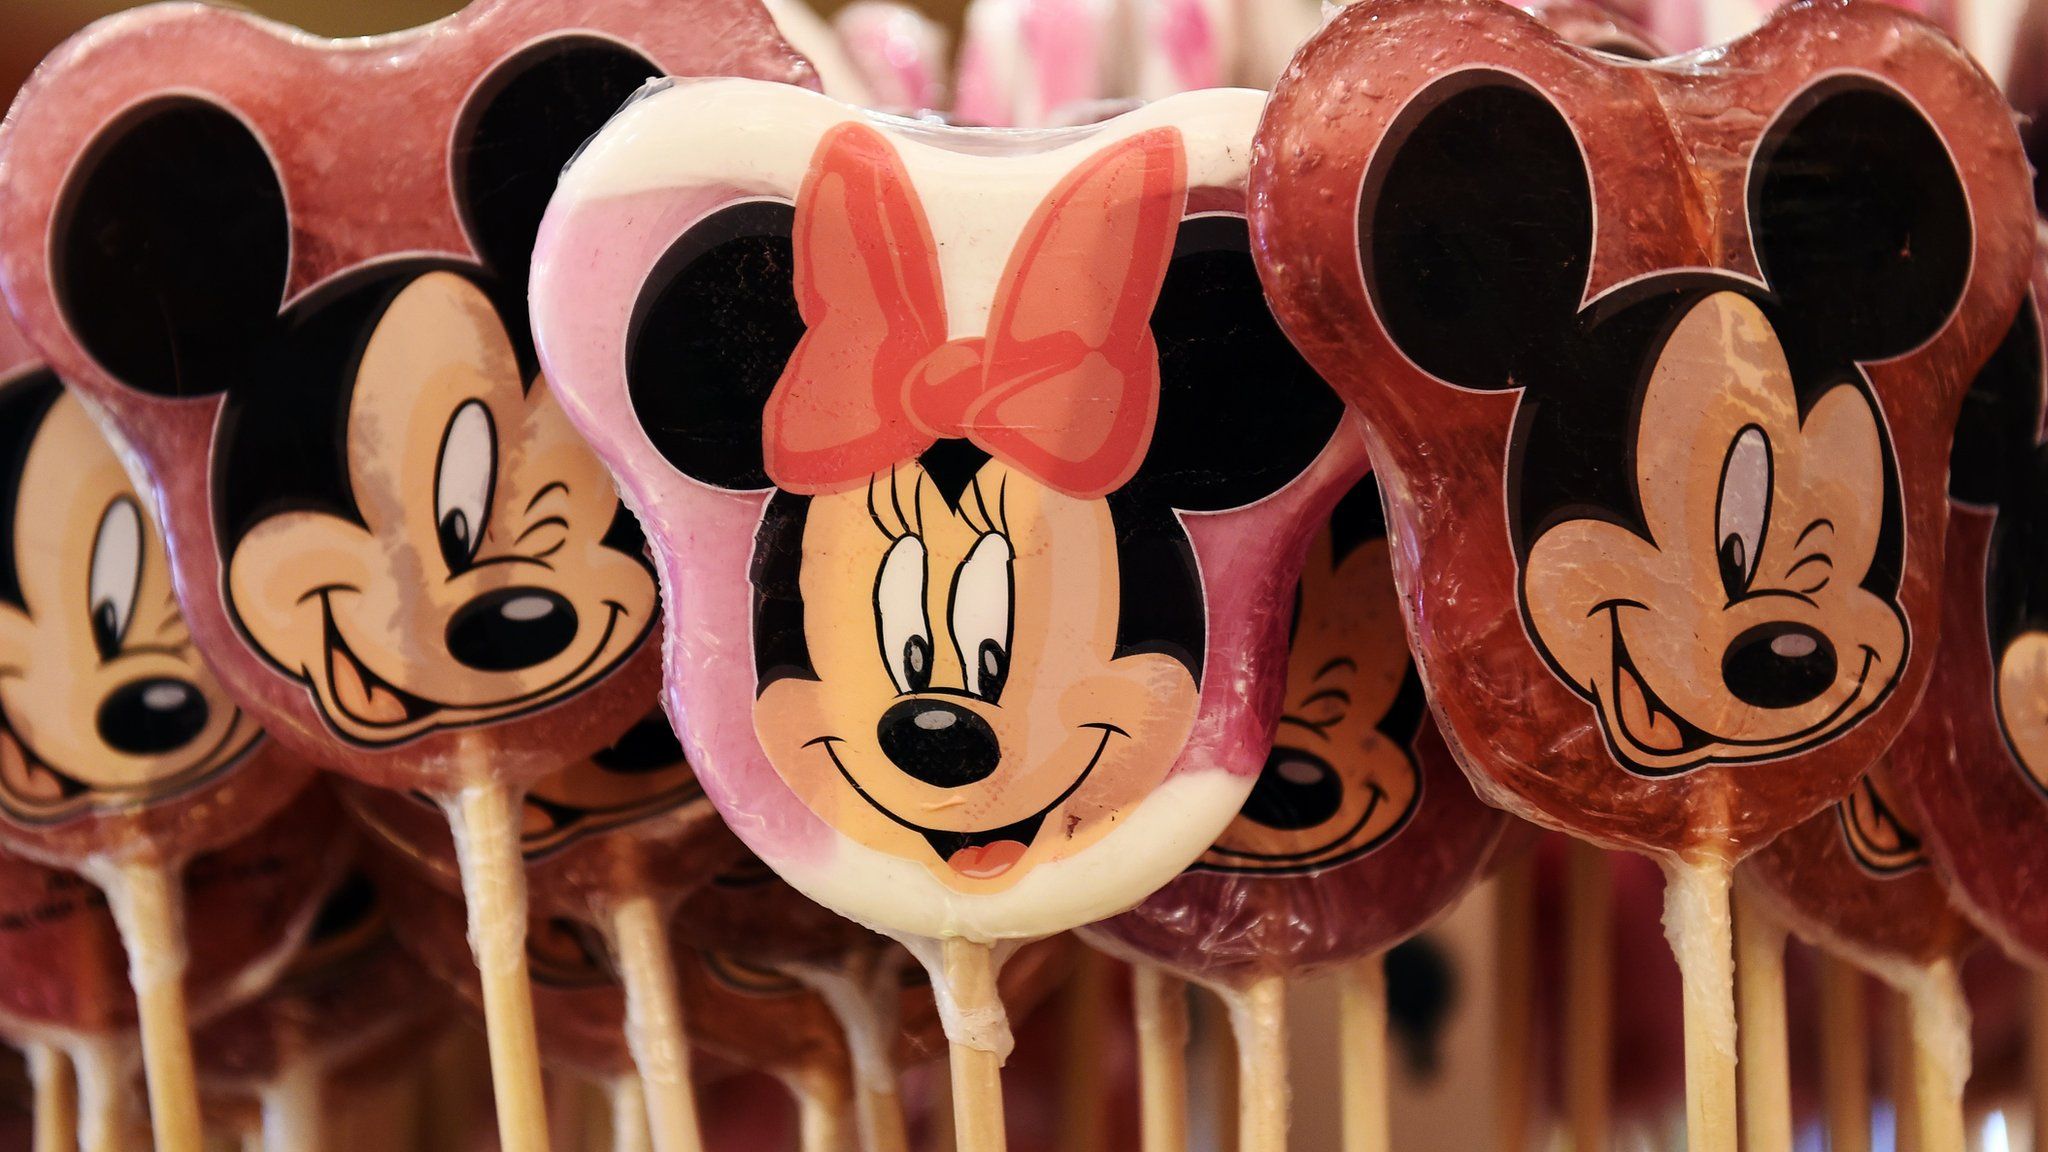 Mickey Mouse pops